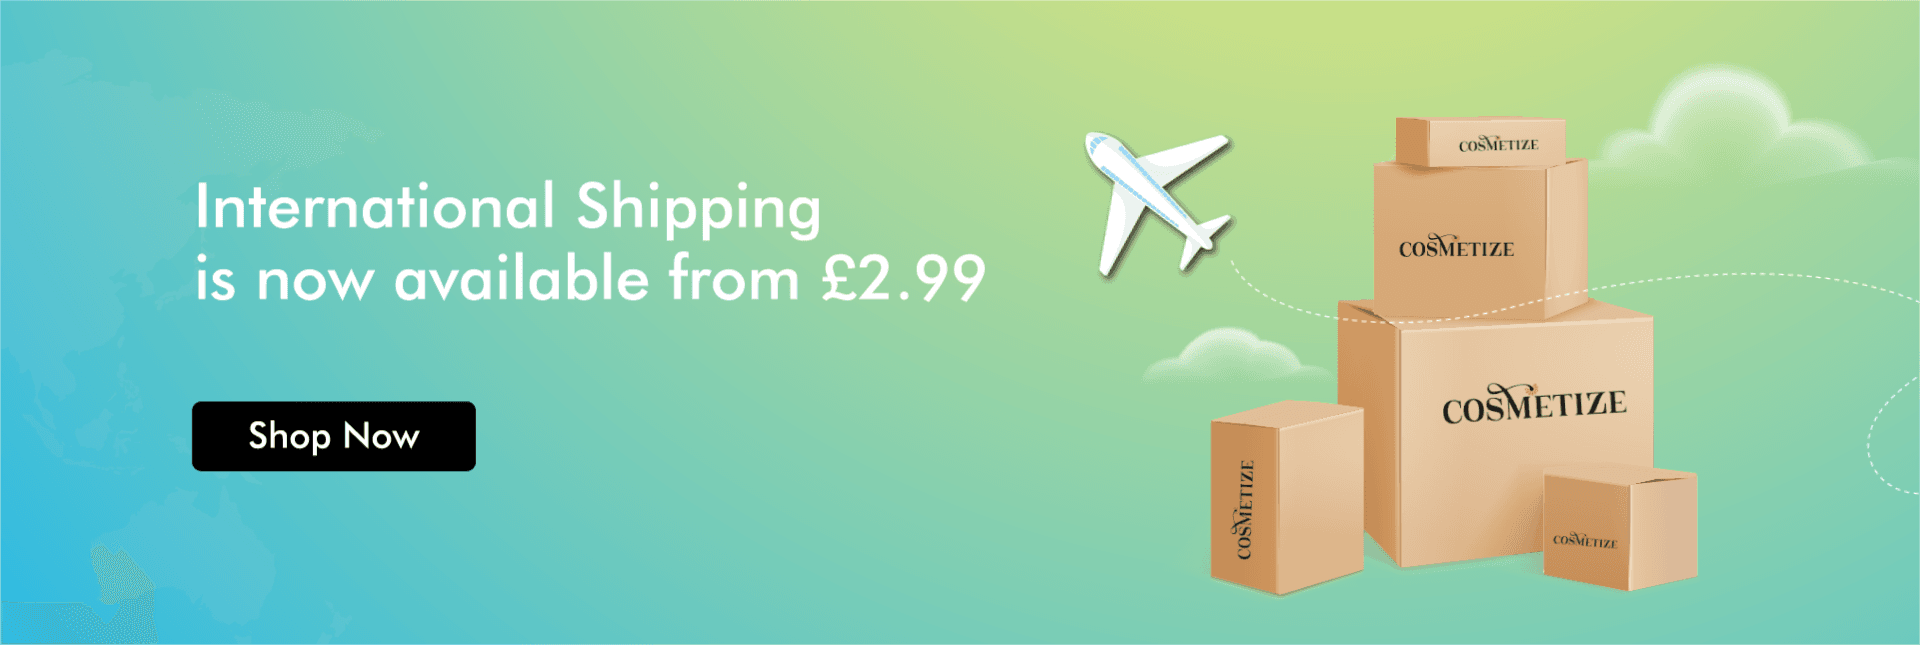 International Shipping is now available from £2.99